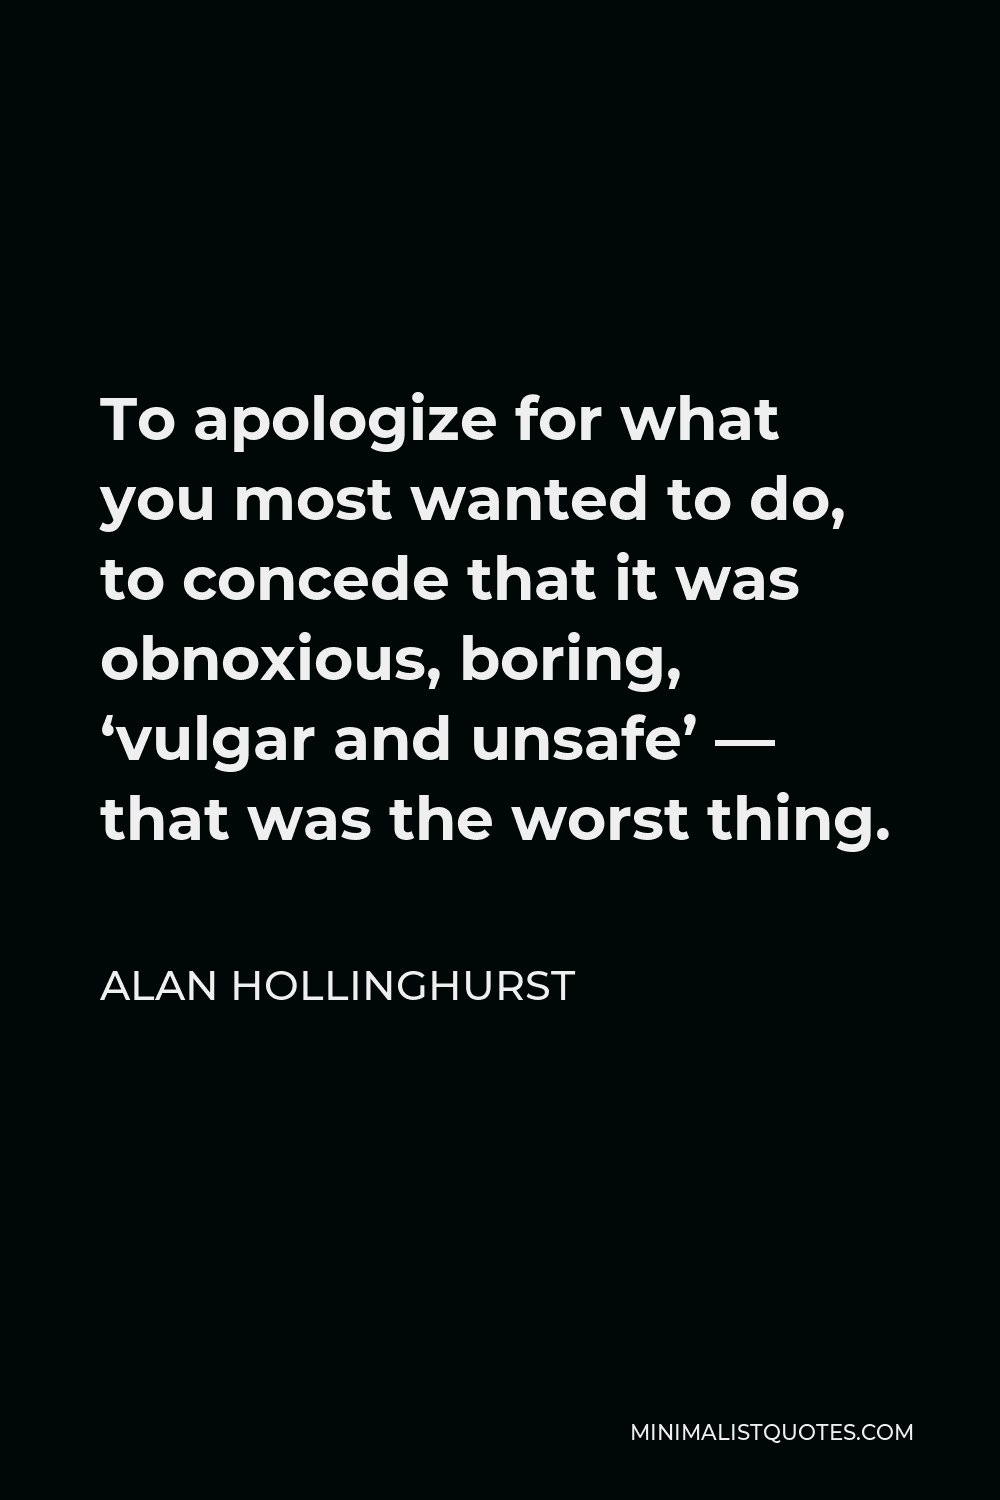 Alan Hollinghurst Quote - To apologize for what you most wanted to do, to concede that it was obnoxious, boring, ‘vulgar and unsafe’ — that was the worst thing.